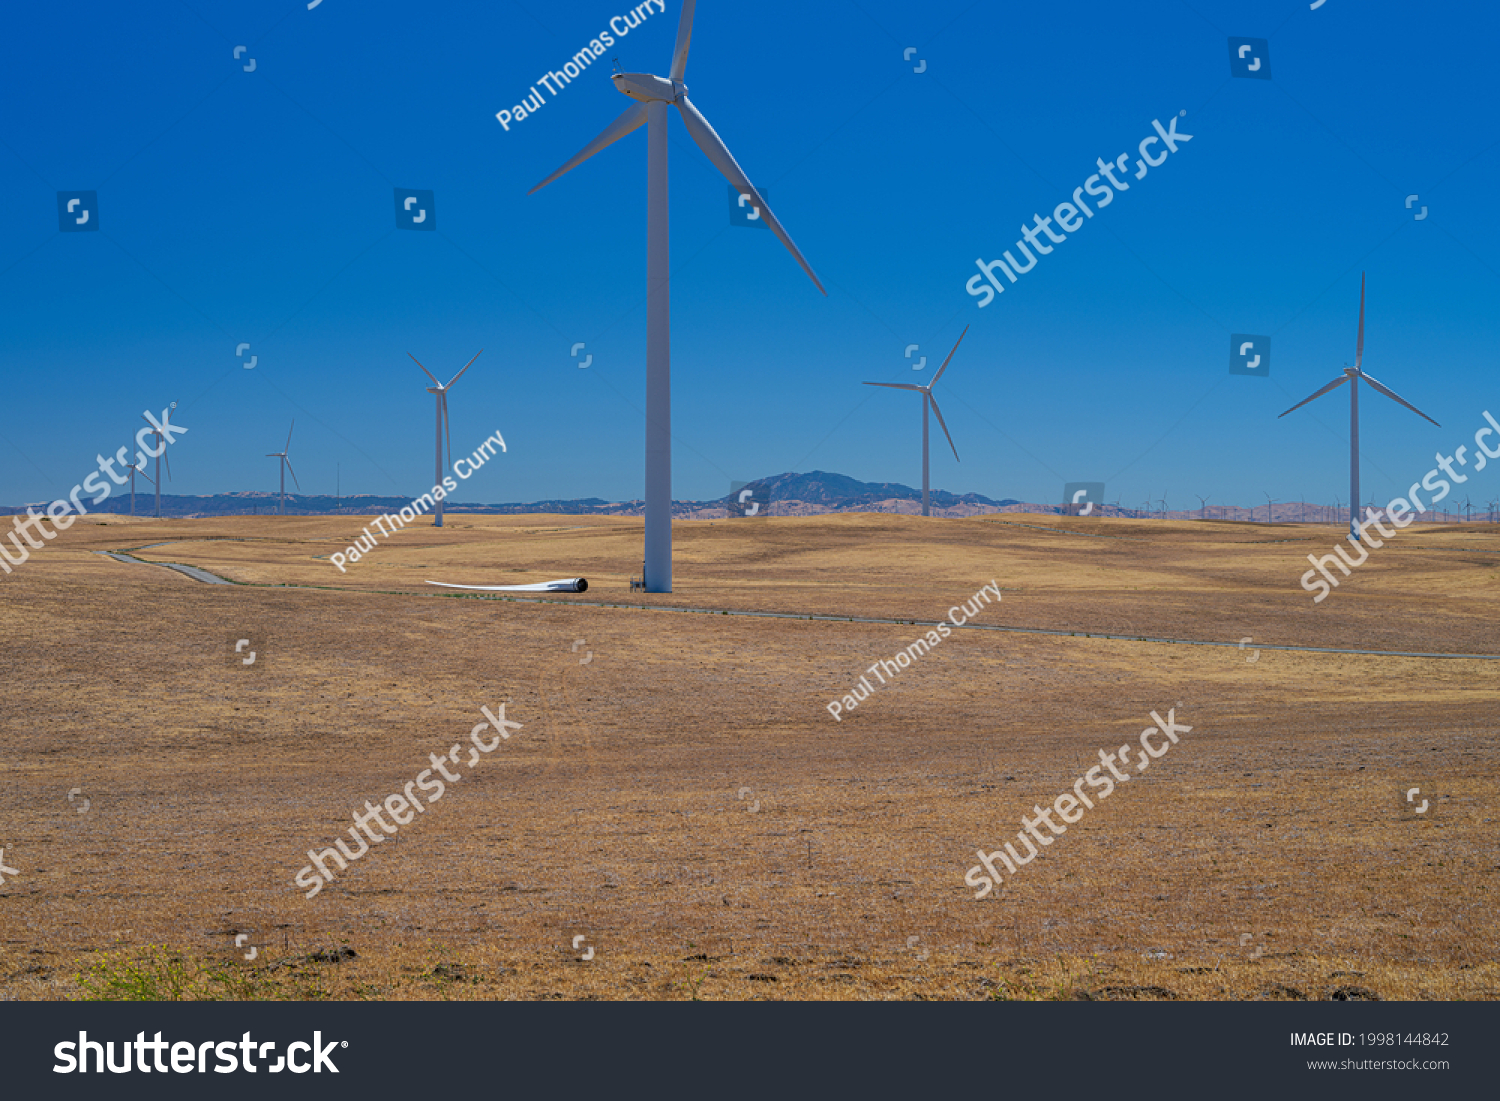 Windustry, an airfoil lays on the ground afoot of a wind turbine on the wind farm. #1998144842